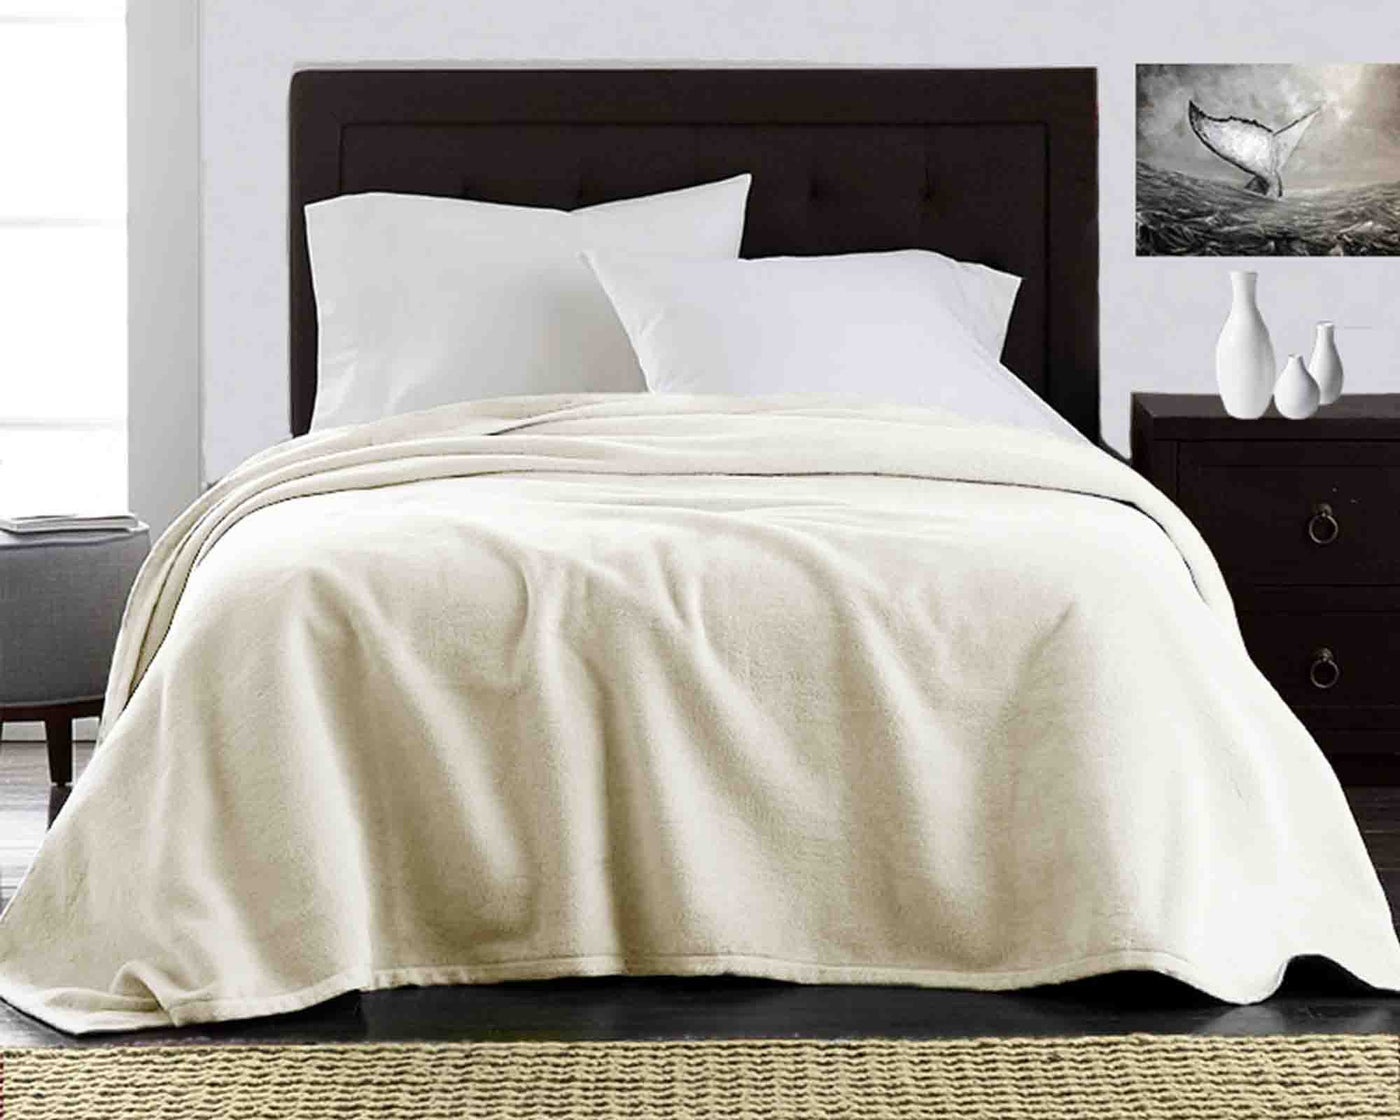 Ivory ultra plush fleece blanket with white hypoallergenic pillows#colour_ivory